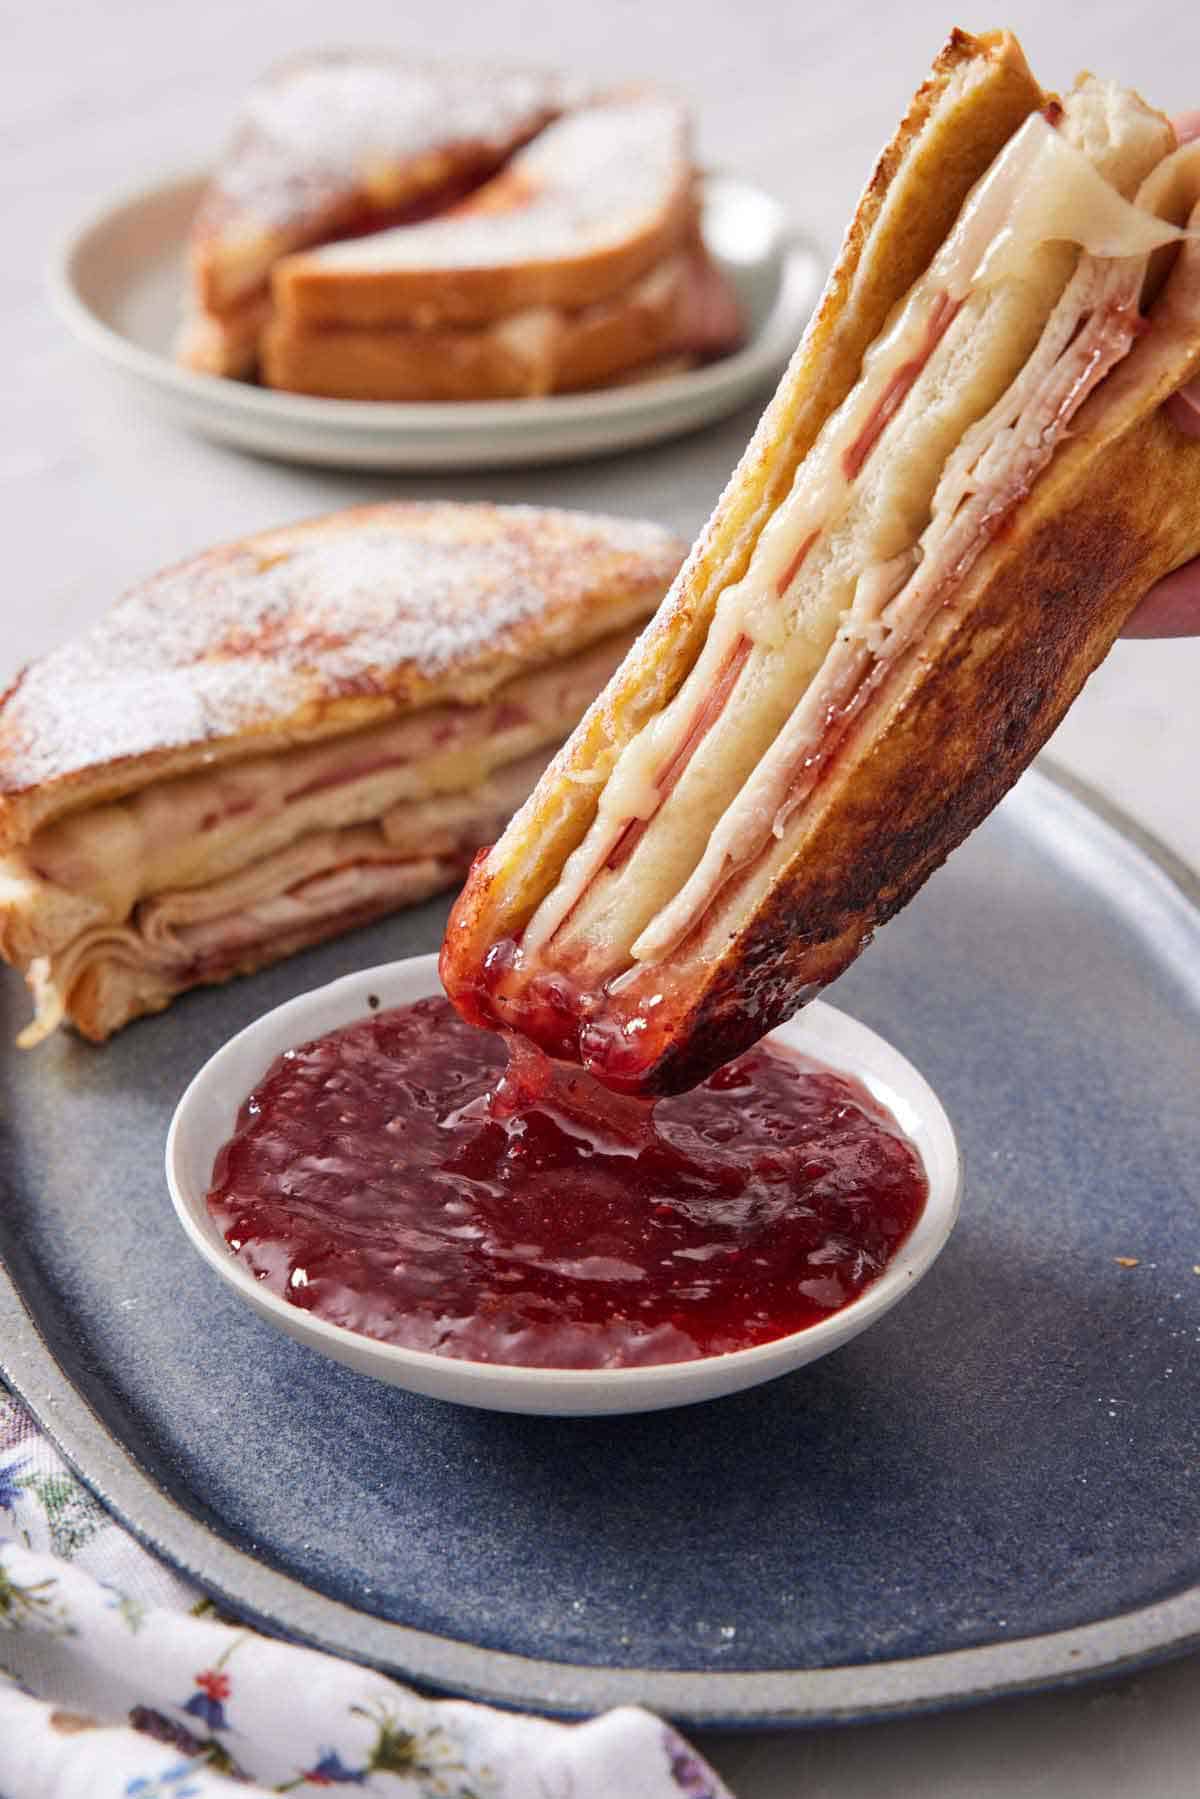 Half of a Monte Cristo sandwich dipped into a bowl of jam.